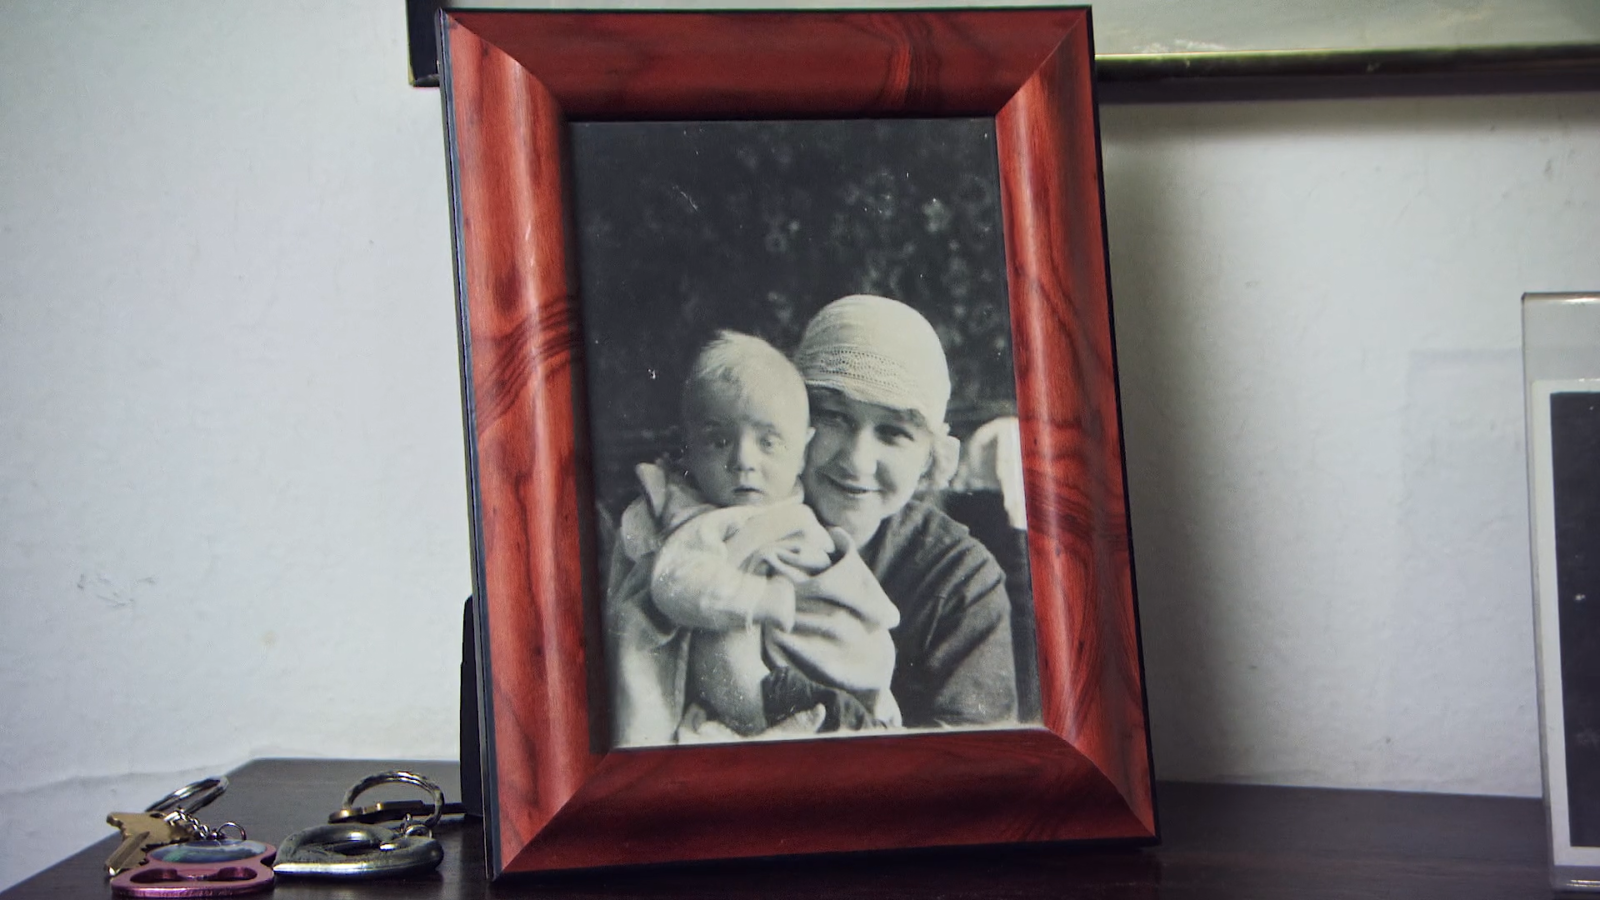 A black-and-white photograph of Serge Hollerbach as a baby with his mother in the early 1920s in Pushkin, Russia. His eyes look startled as he gazes into the camera, and his mother, who is holding him, is wearing a woven hat. The picture's in a red wooden frame on top of a credenza. Next to it are two sets of keys.